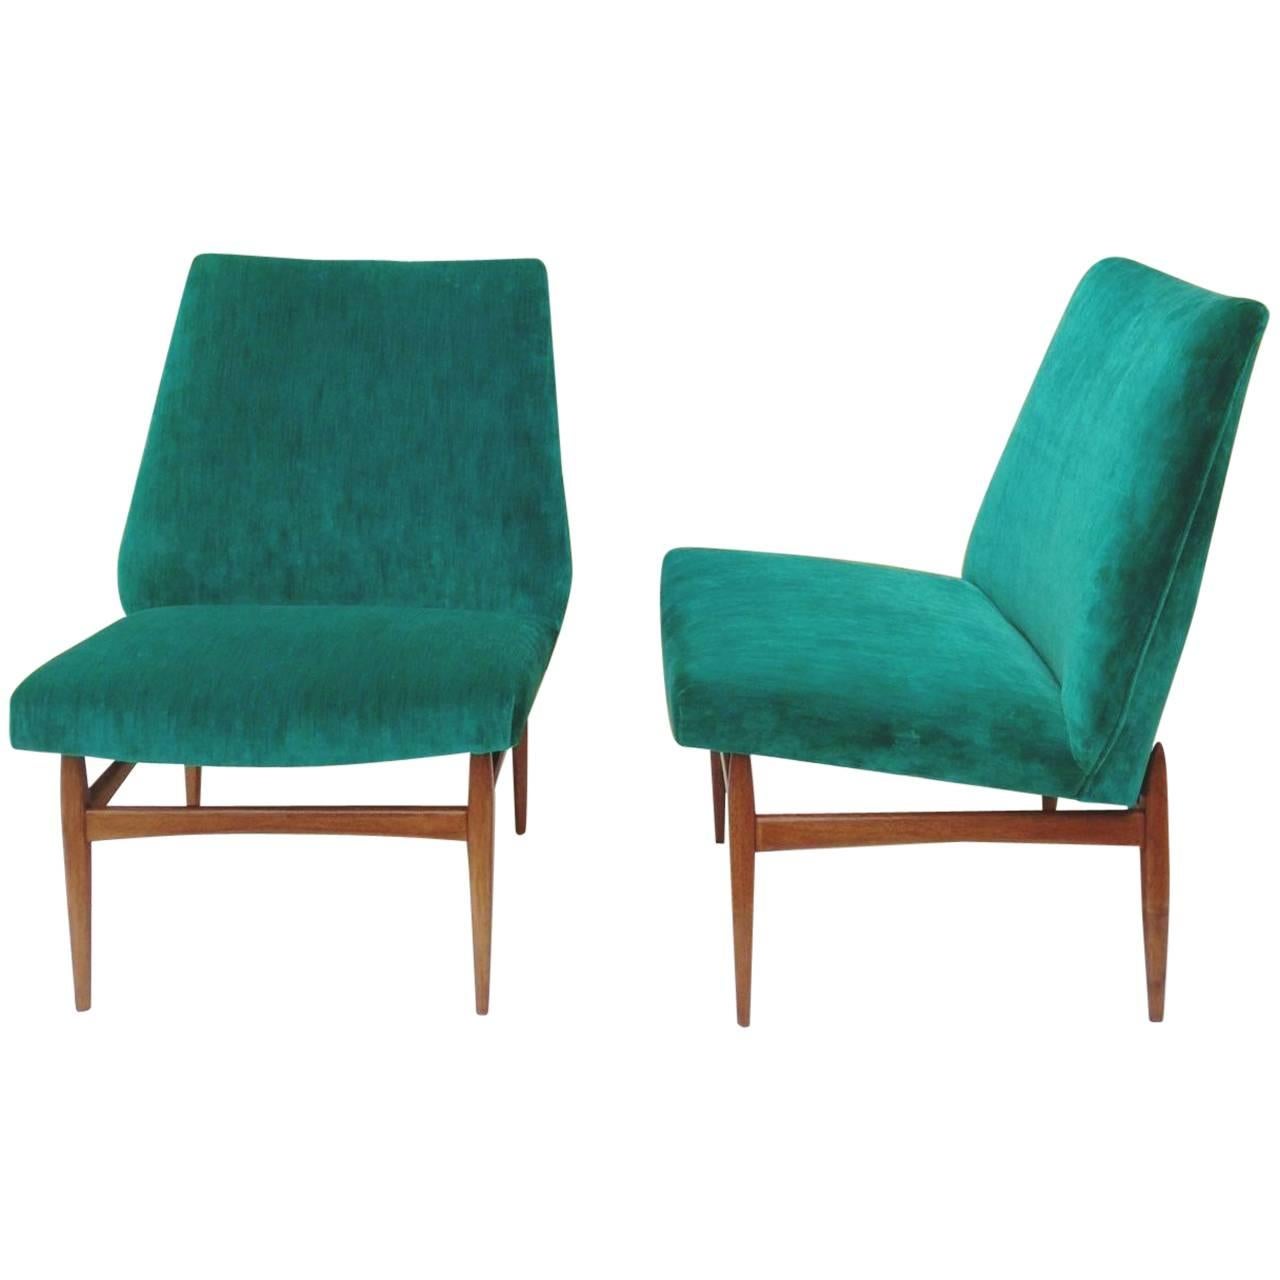 1960s Refined Pair of Chairs in Green Fabric For Sale